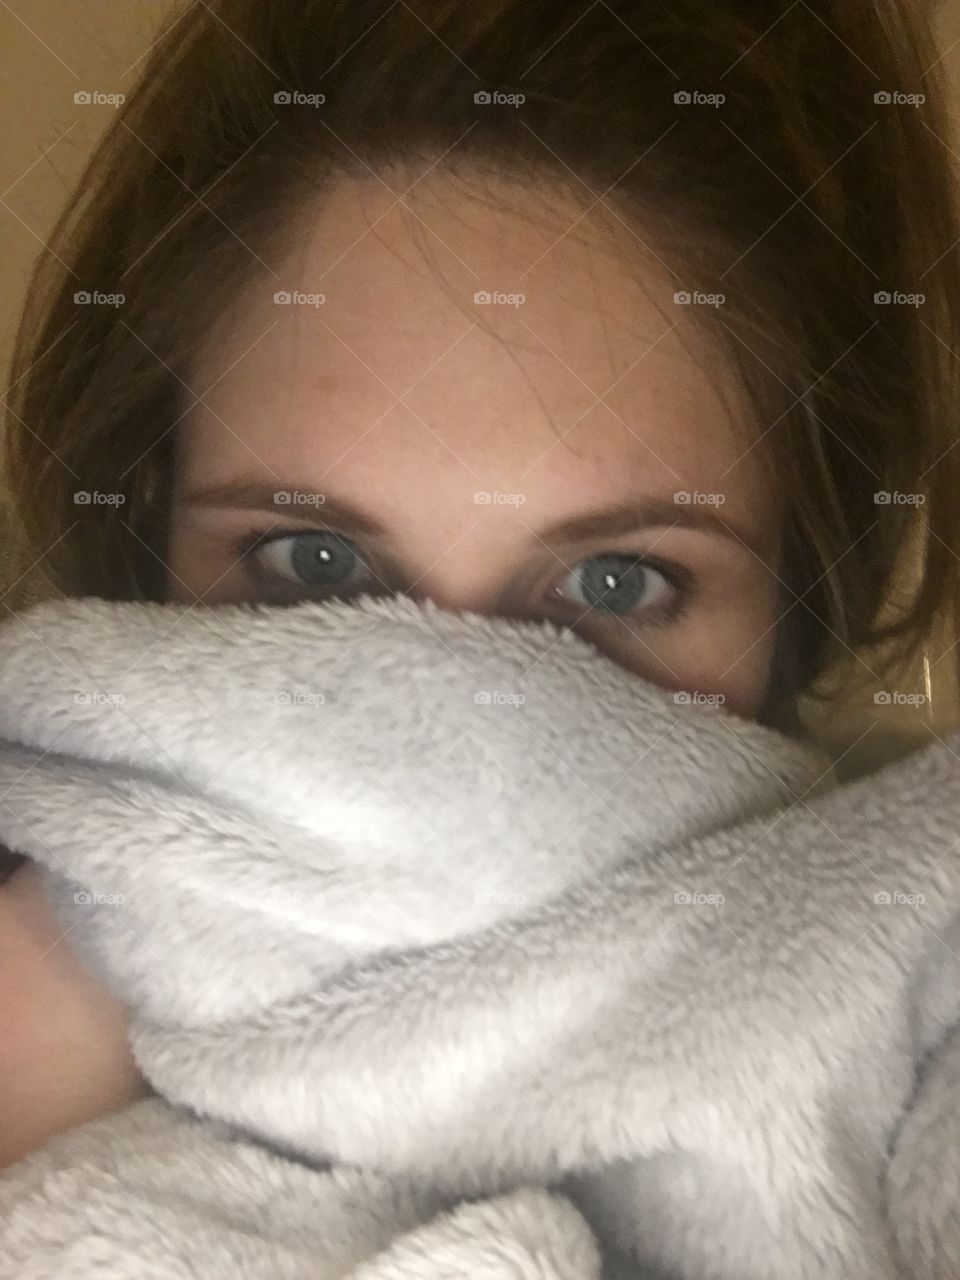 Young woman hiding her face with towel